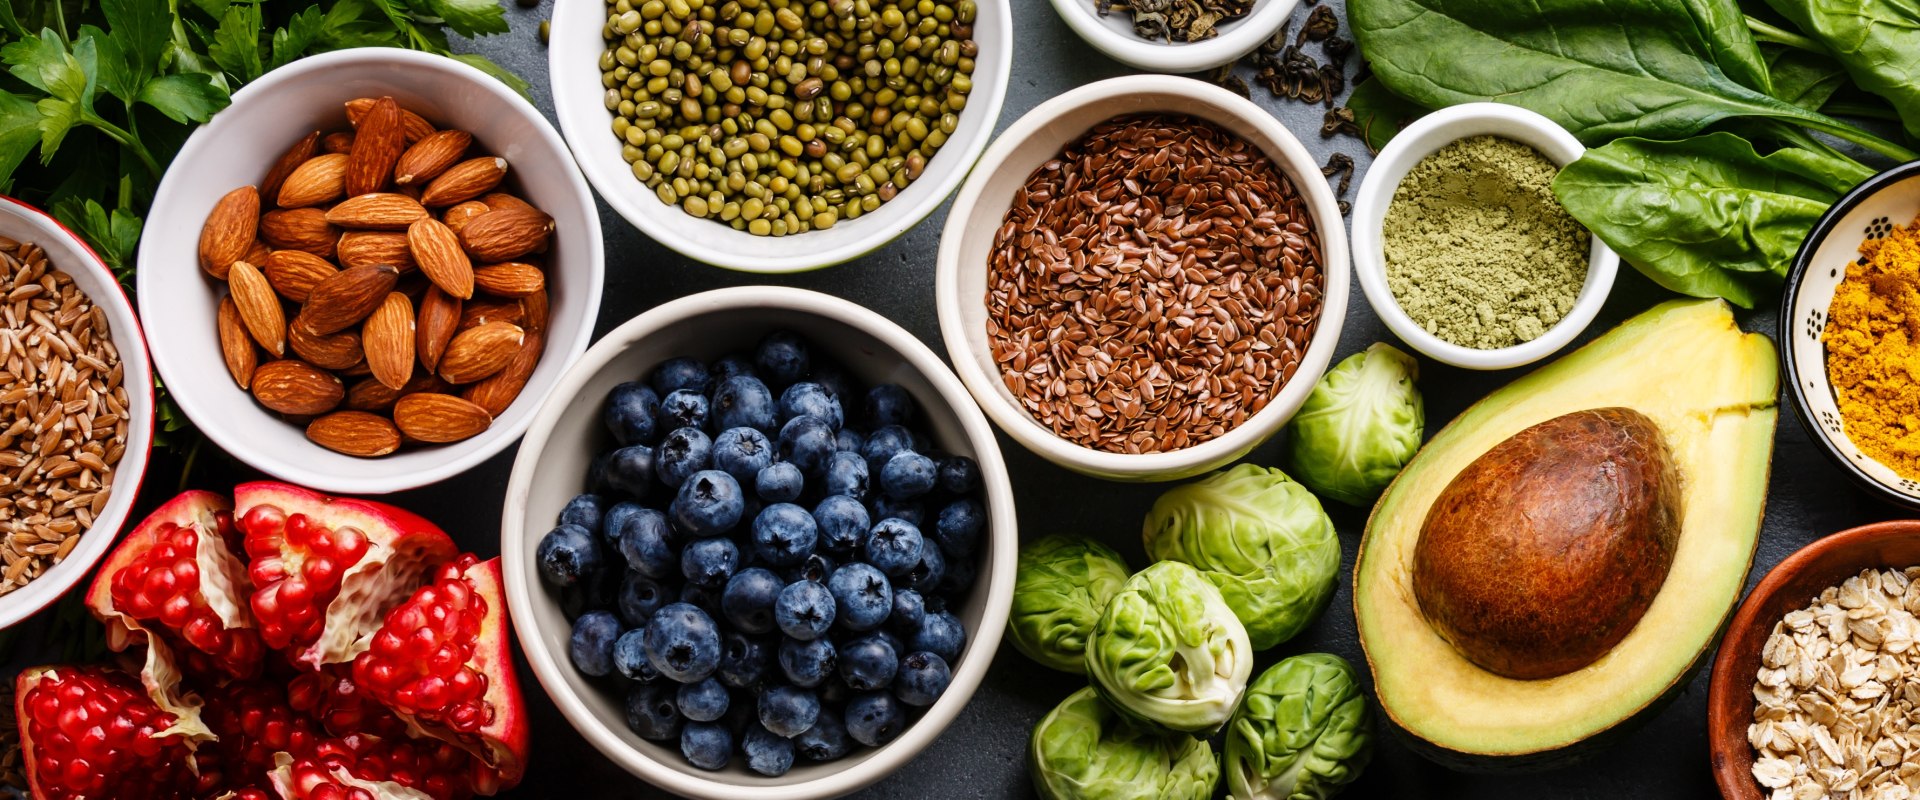 What is the most healthiest superfood?